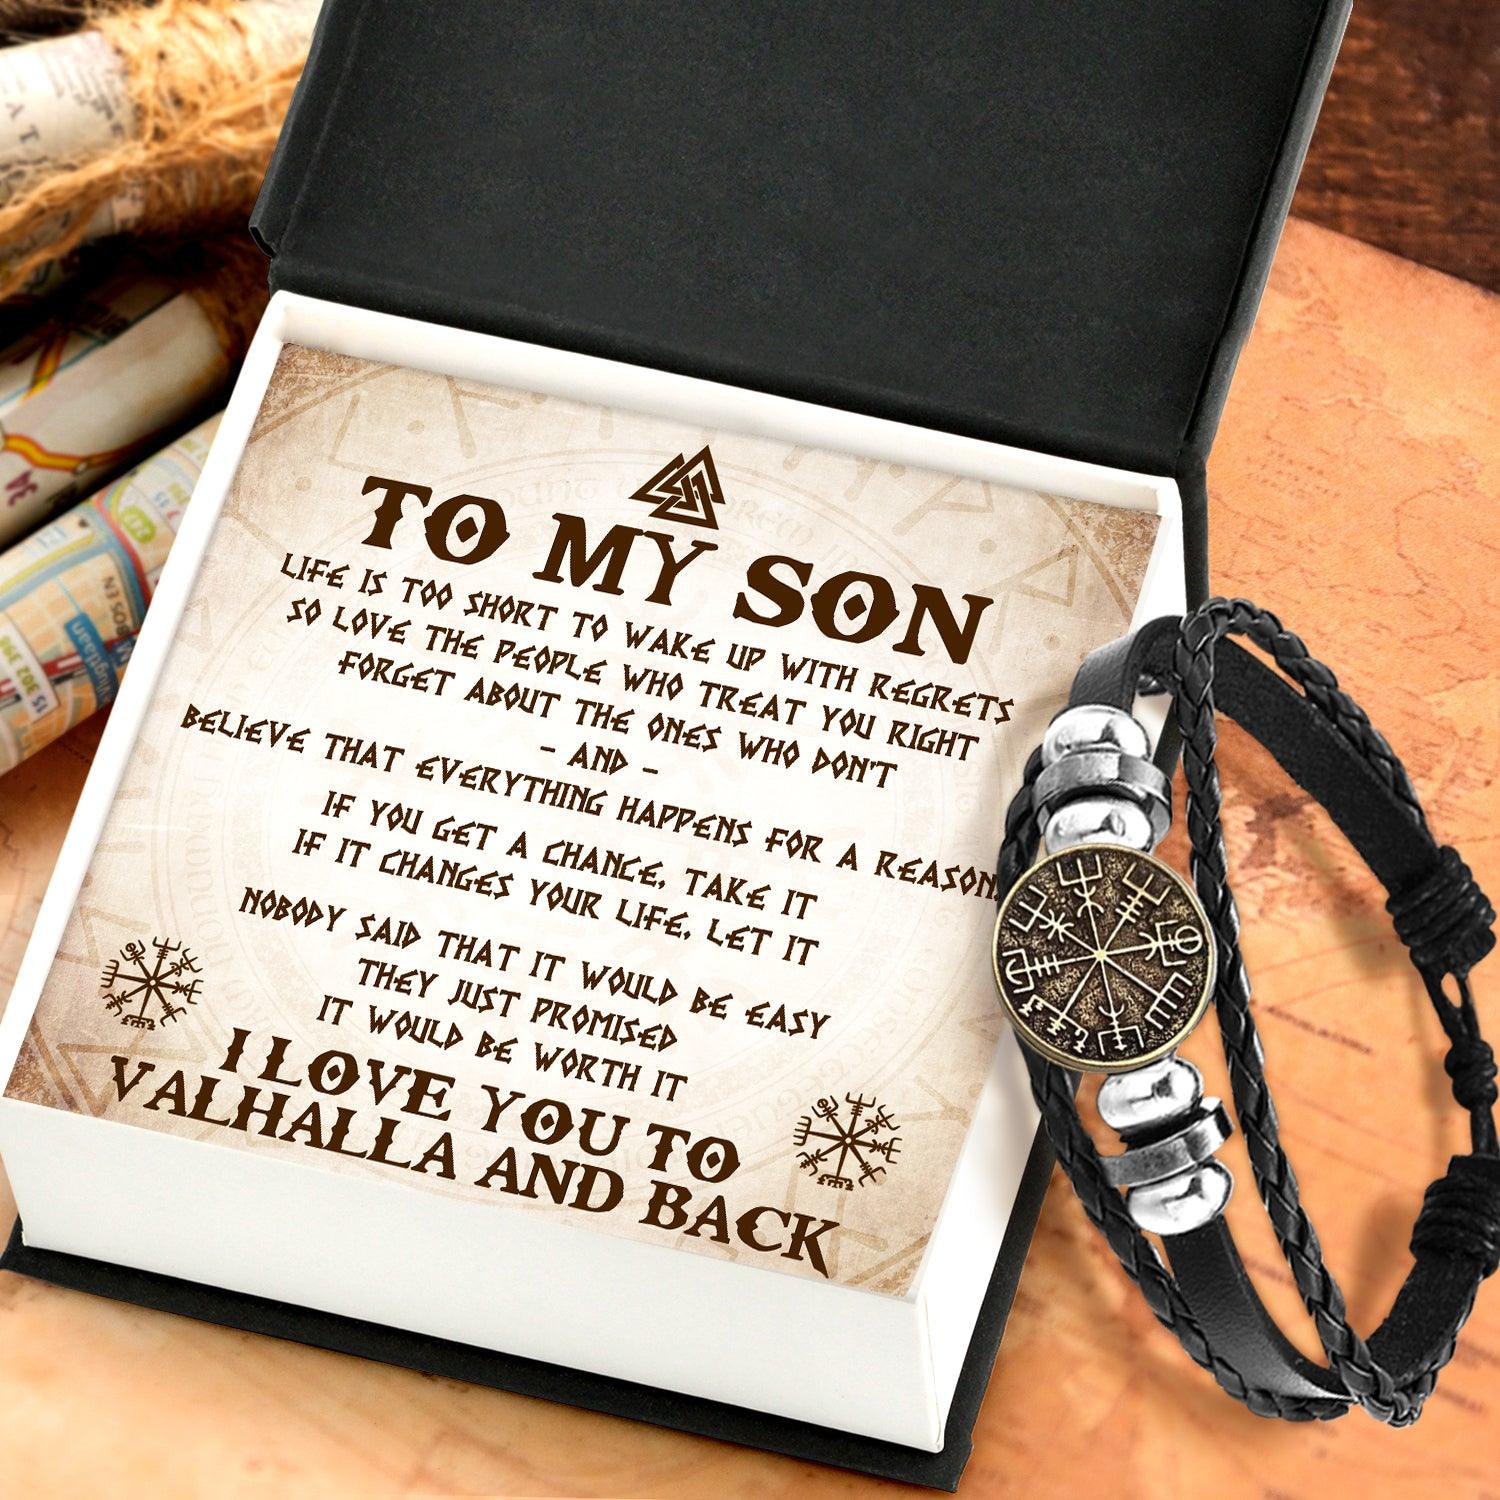 Viking Compass Bracelet - Viking - To My Viking Son - I Love You To Valhalla And Back - Augbla16006 - Gifts Holder